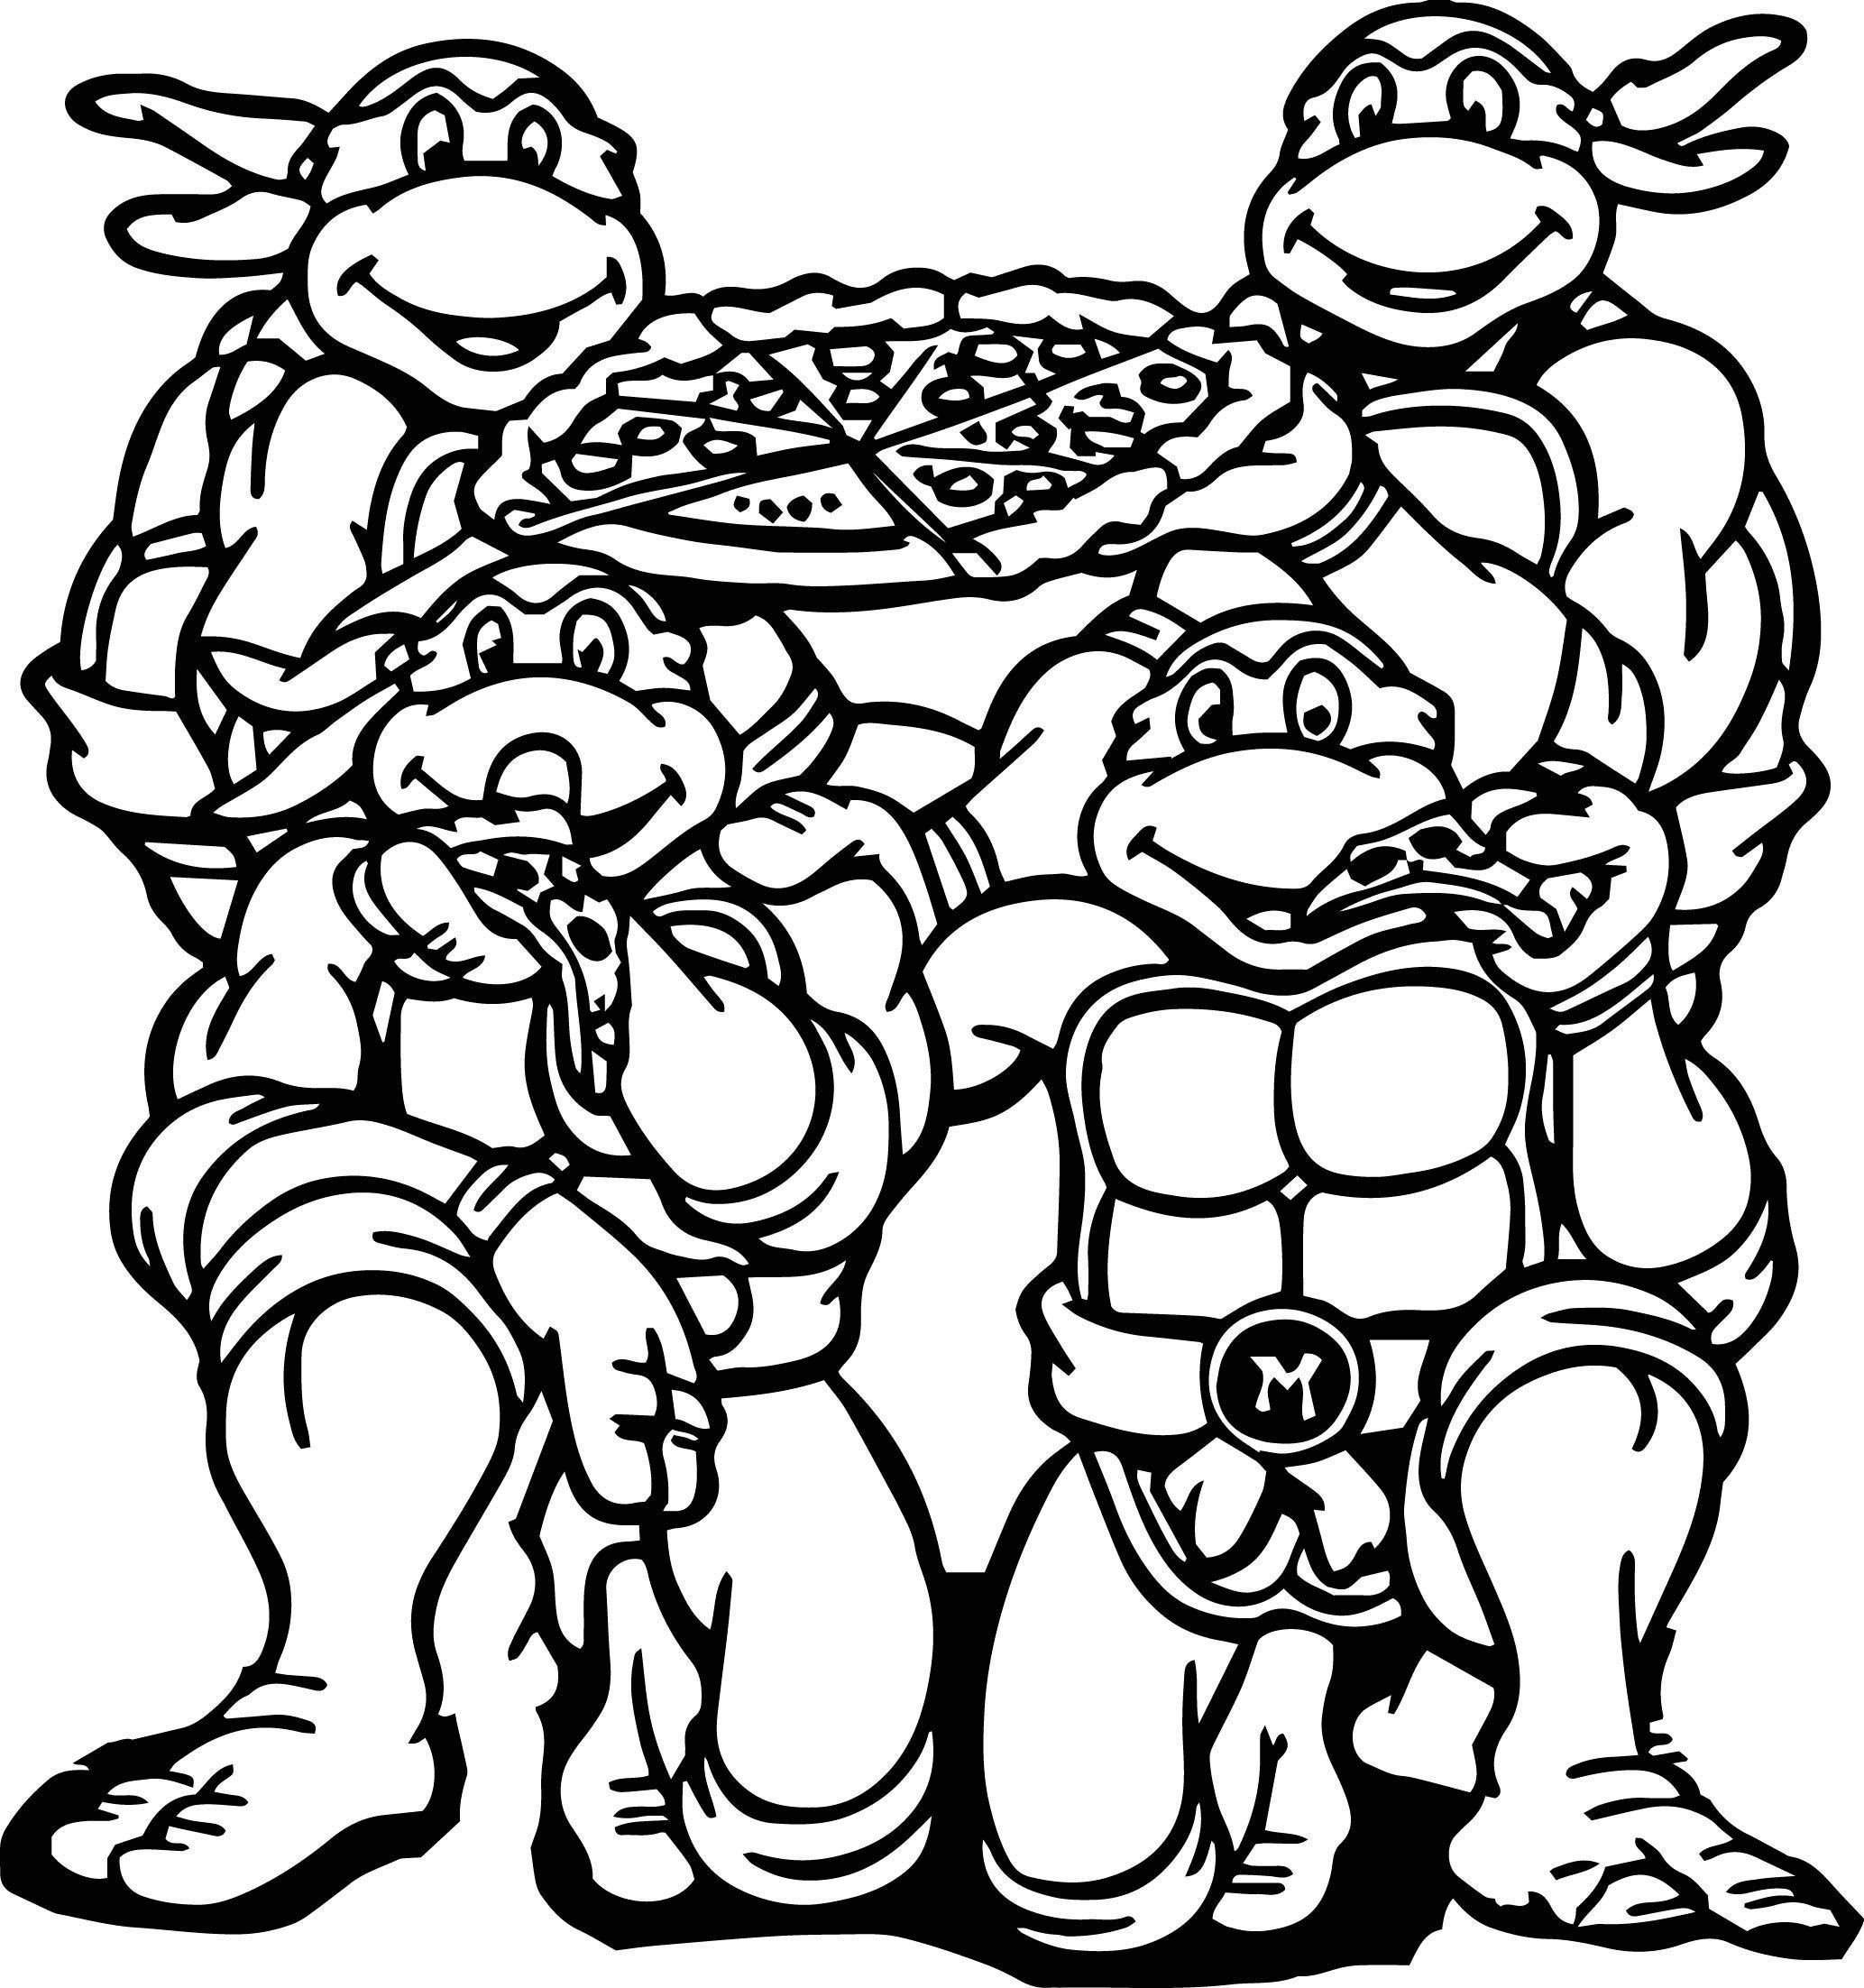 Teenage Mutant Ninja Turtles Coloring Pages - Best Coloring Pages For Kids